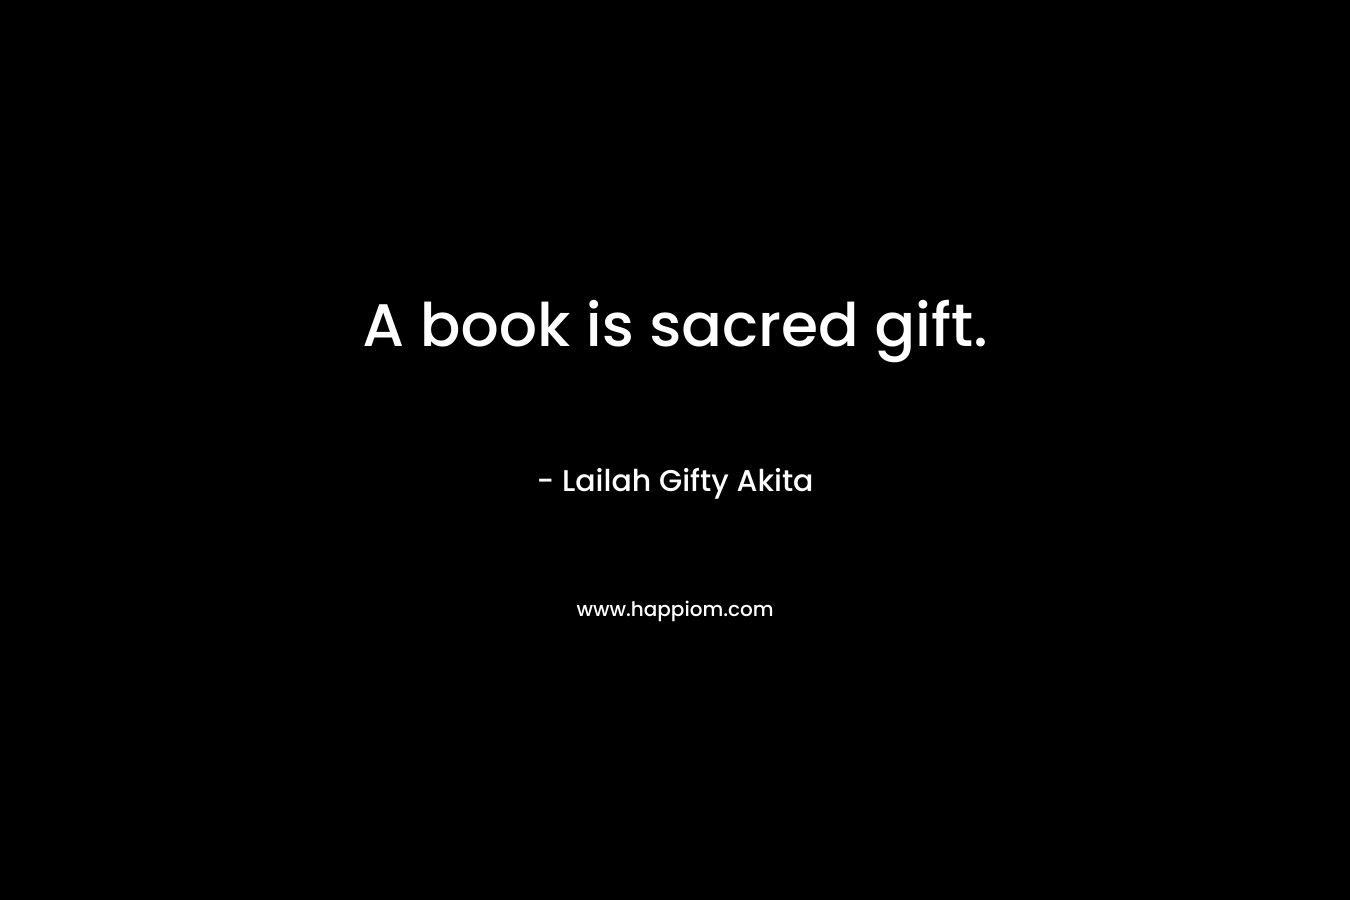 A book is sacred gift.